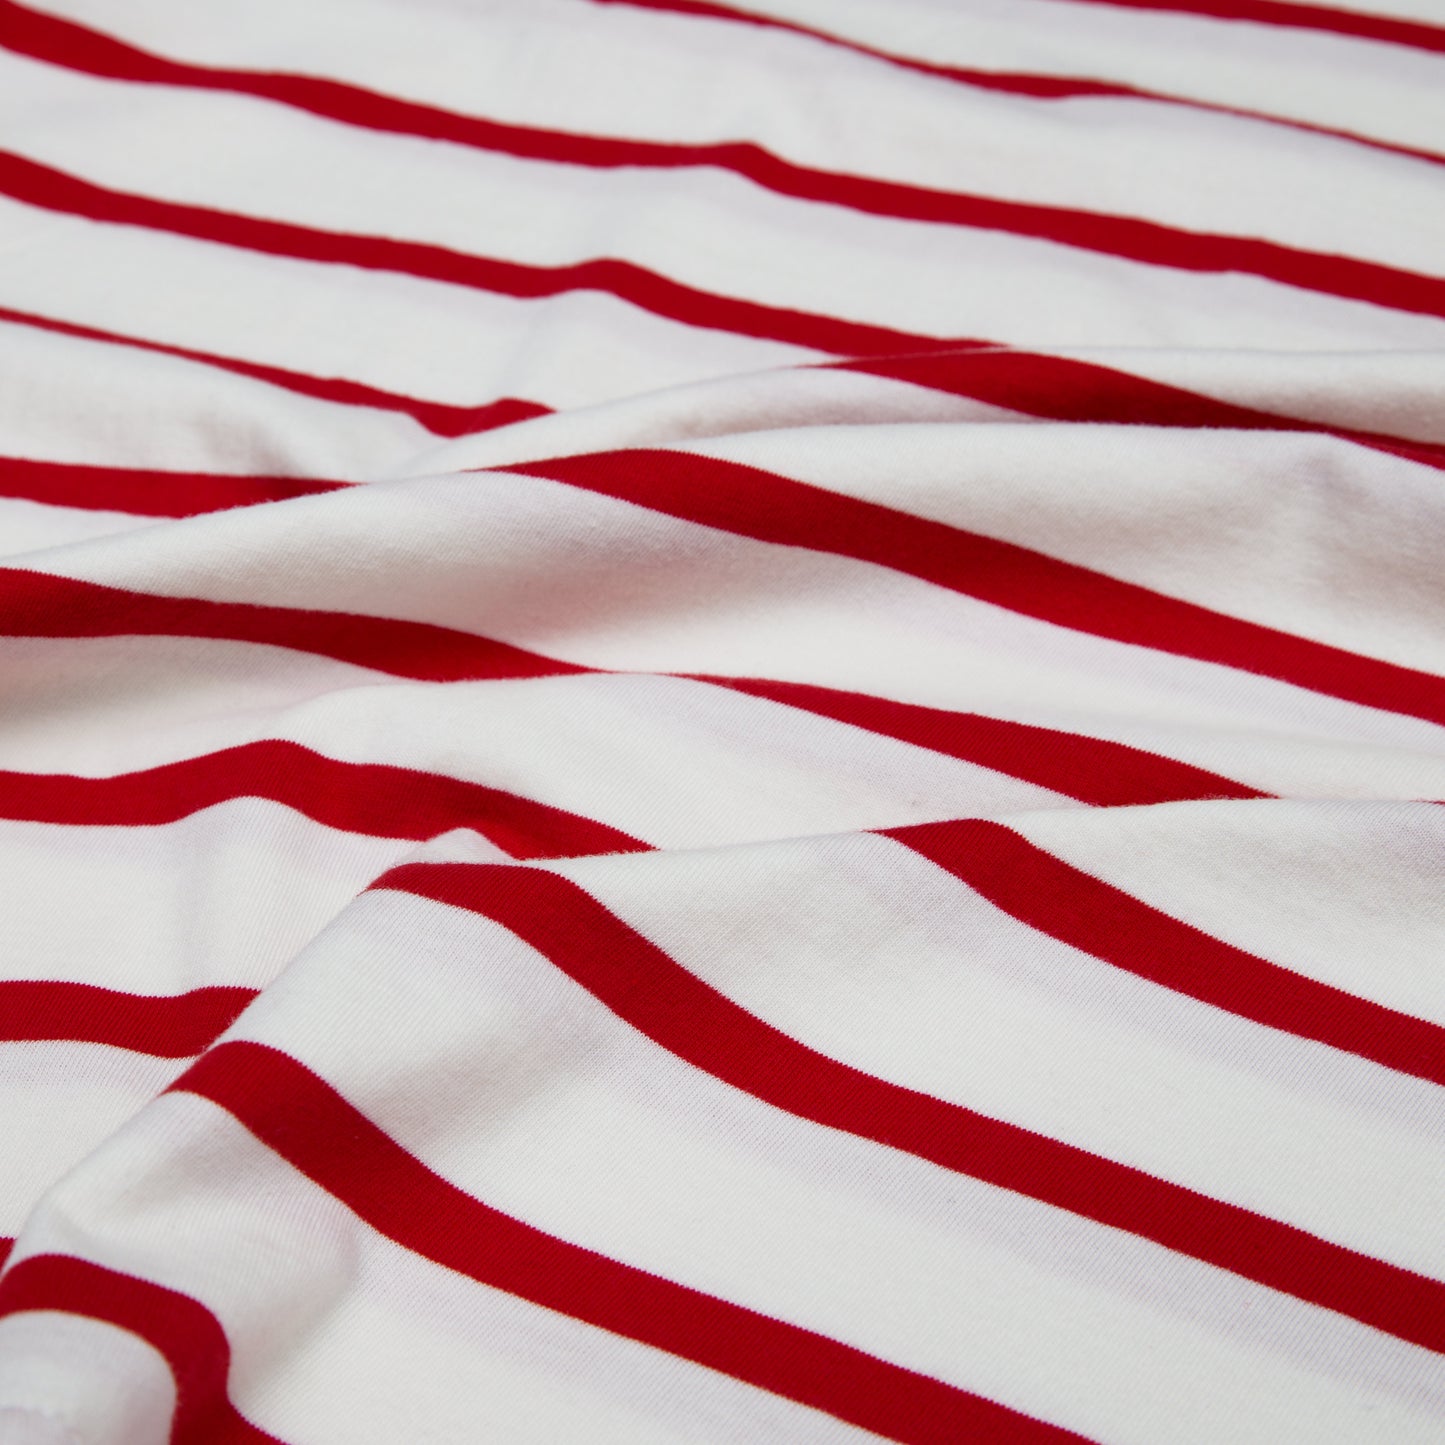 Yarns "Lovers" Striped T-shirt - Red and White